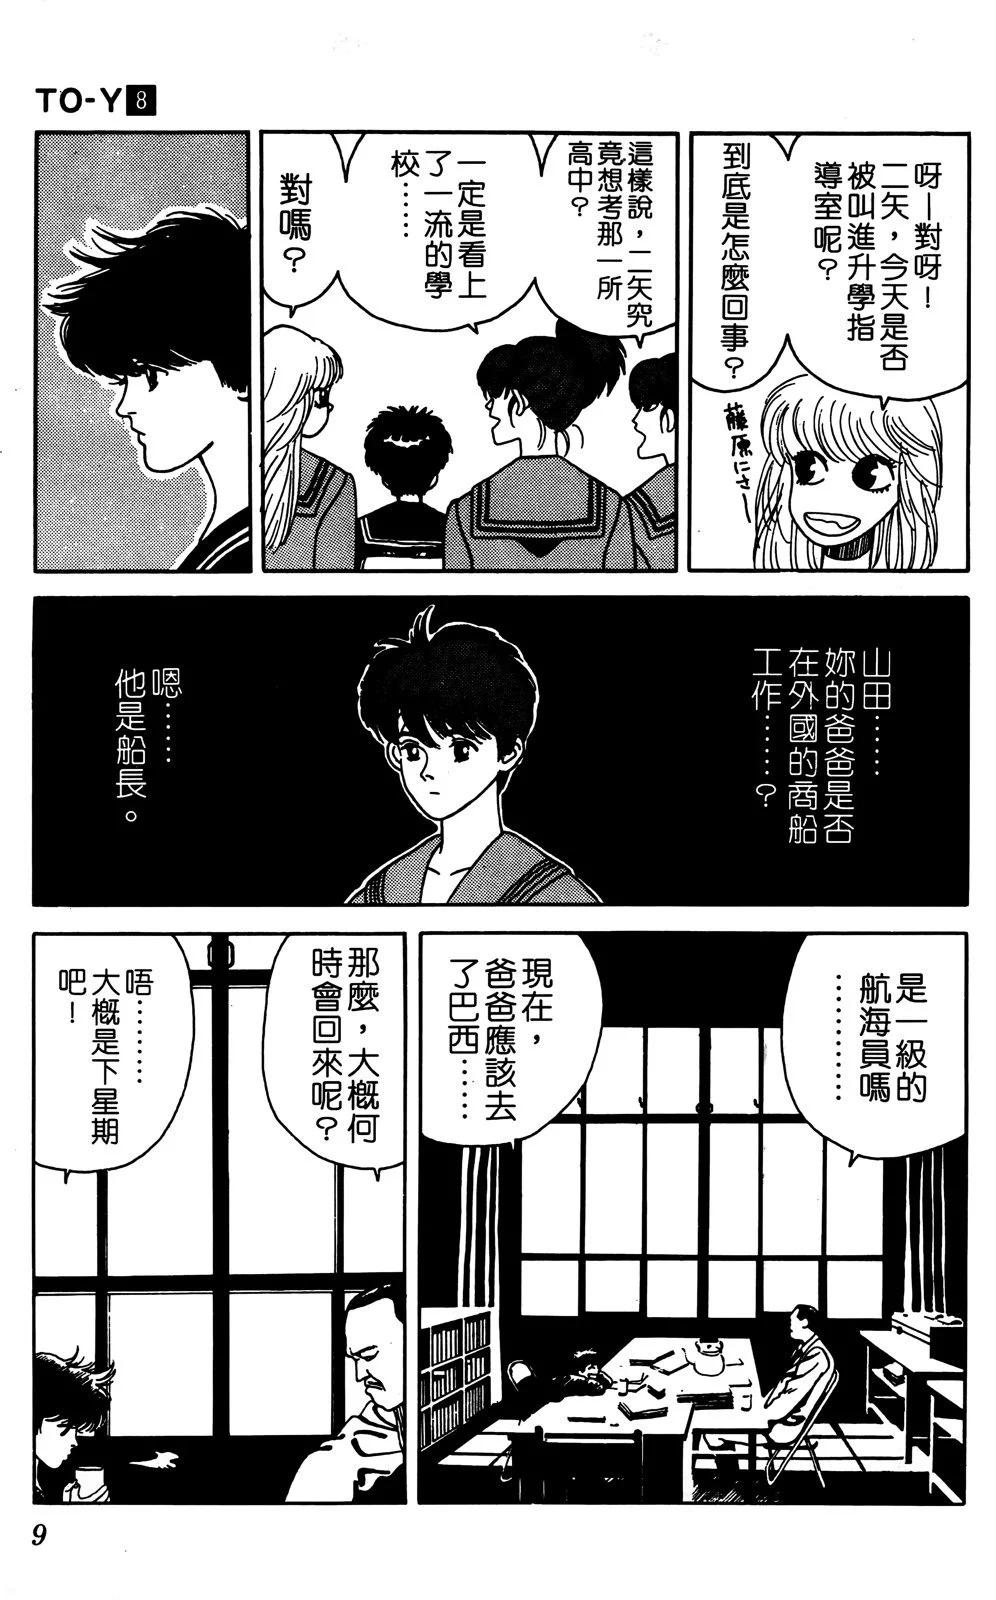 TO-Y - 第08卷(1/4) - 4